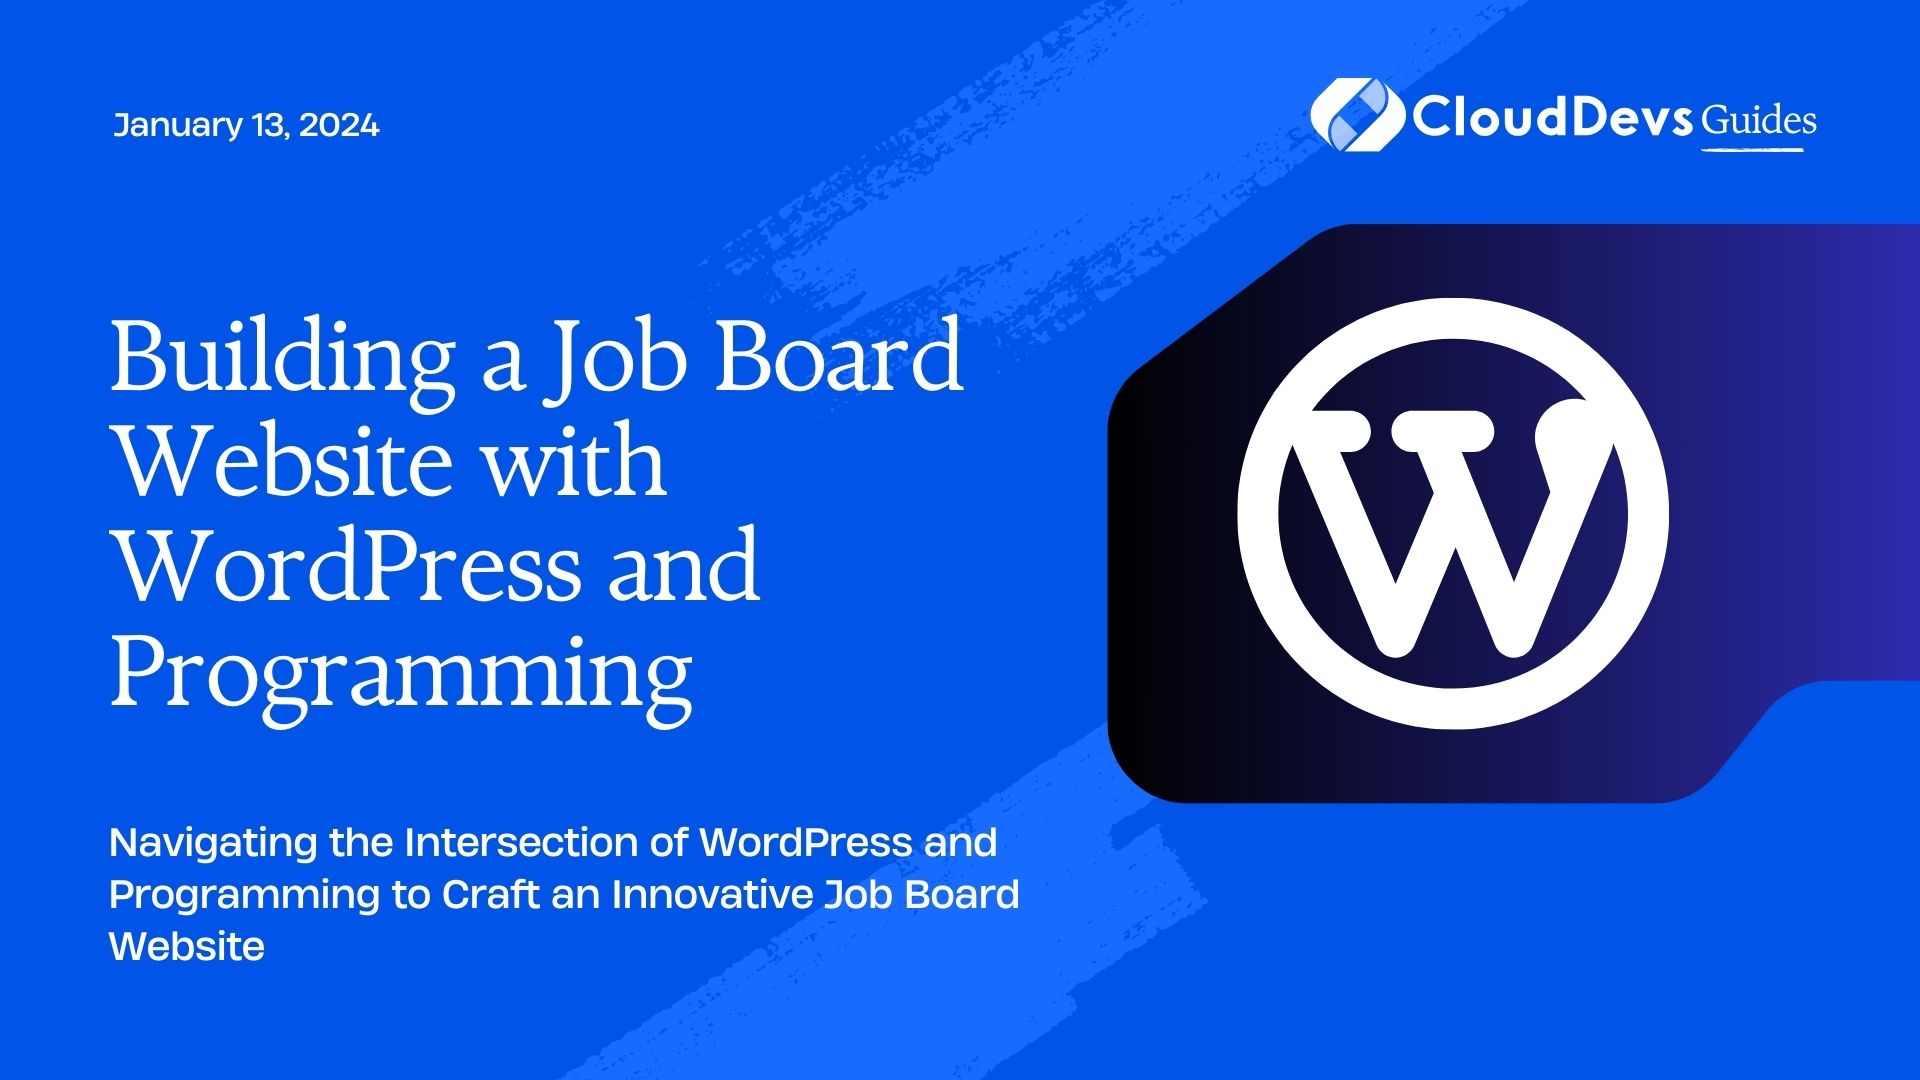 Building a Job Board Website with WordPress and Programming